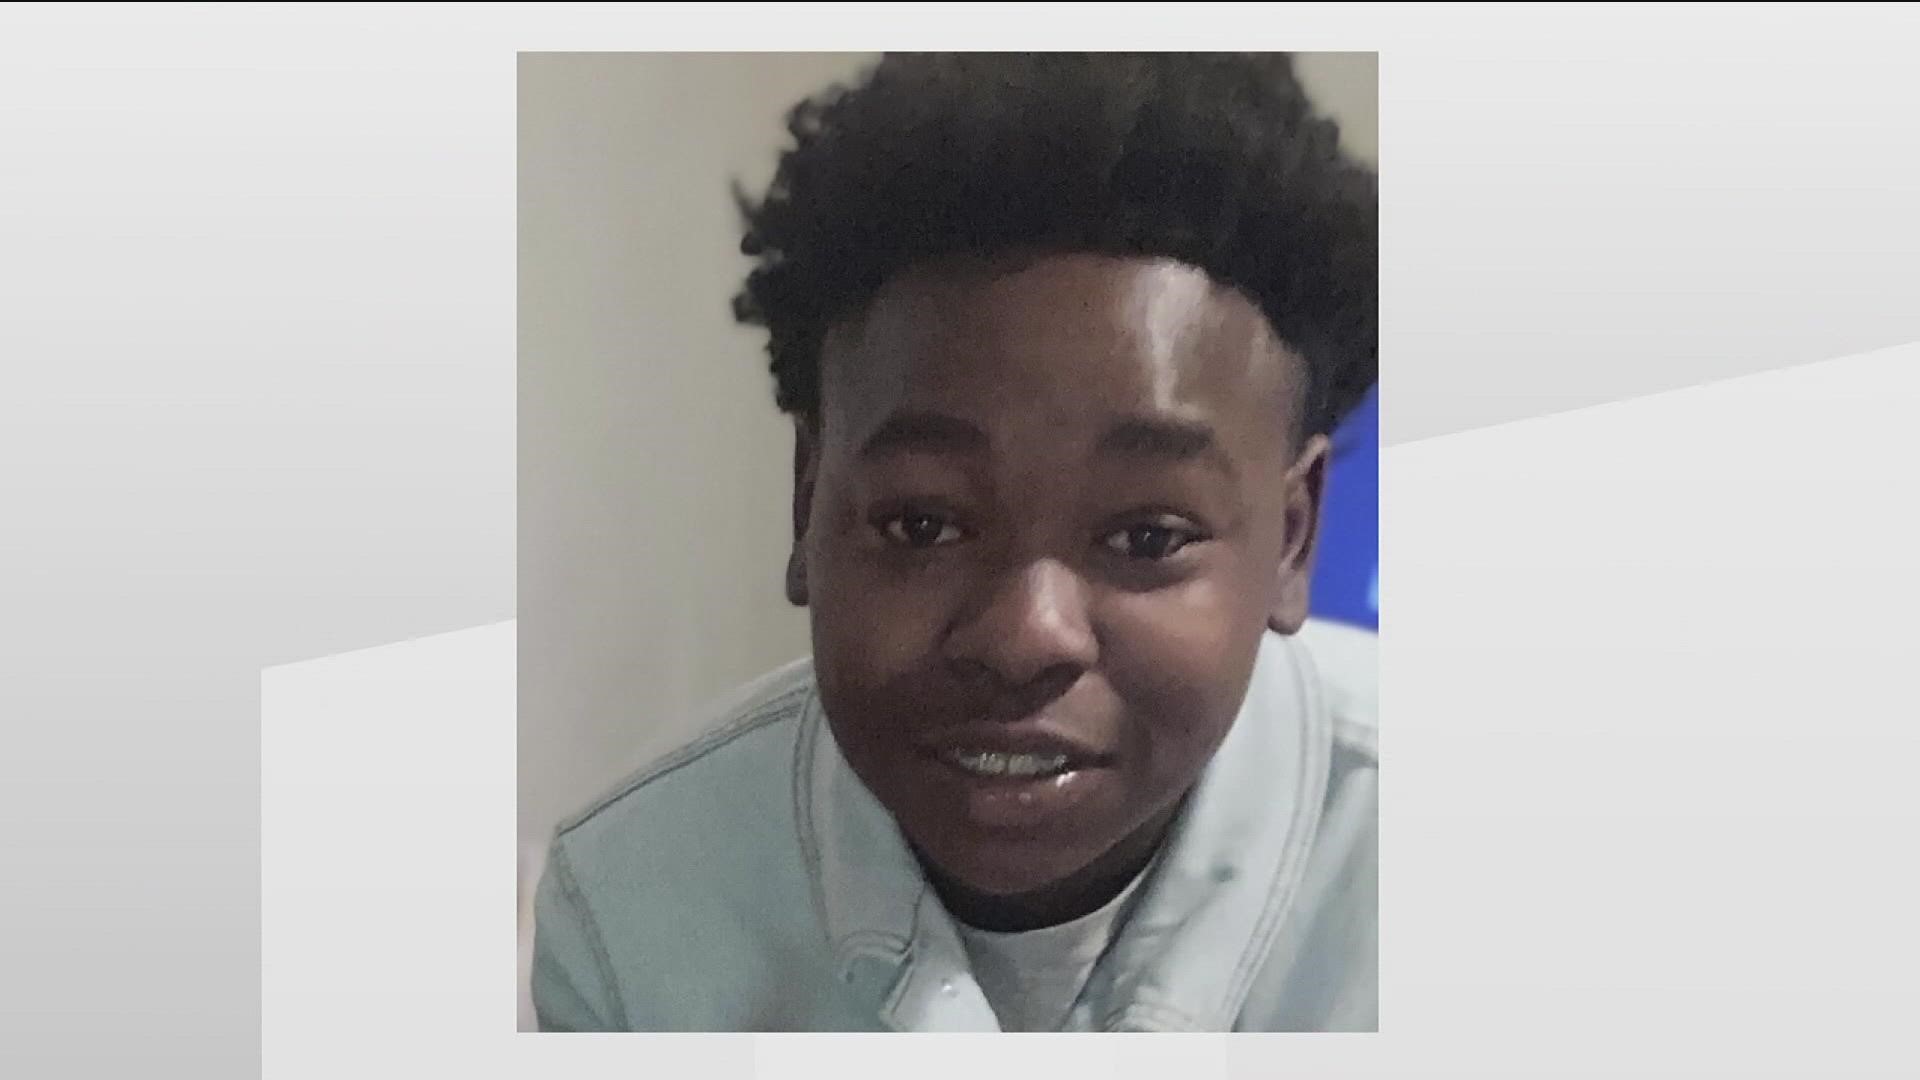 DeAndre was shot and died hours later from his injuries last week in an isolated shooting near the Norcross High campus.